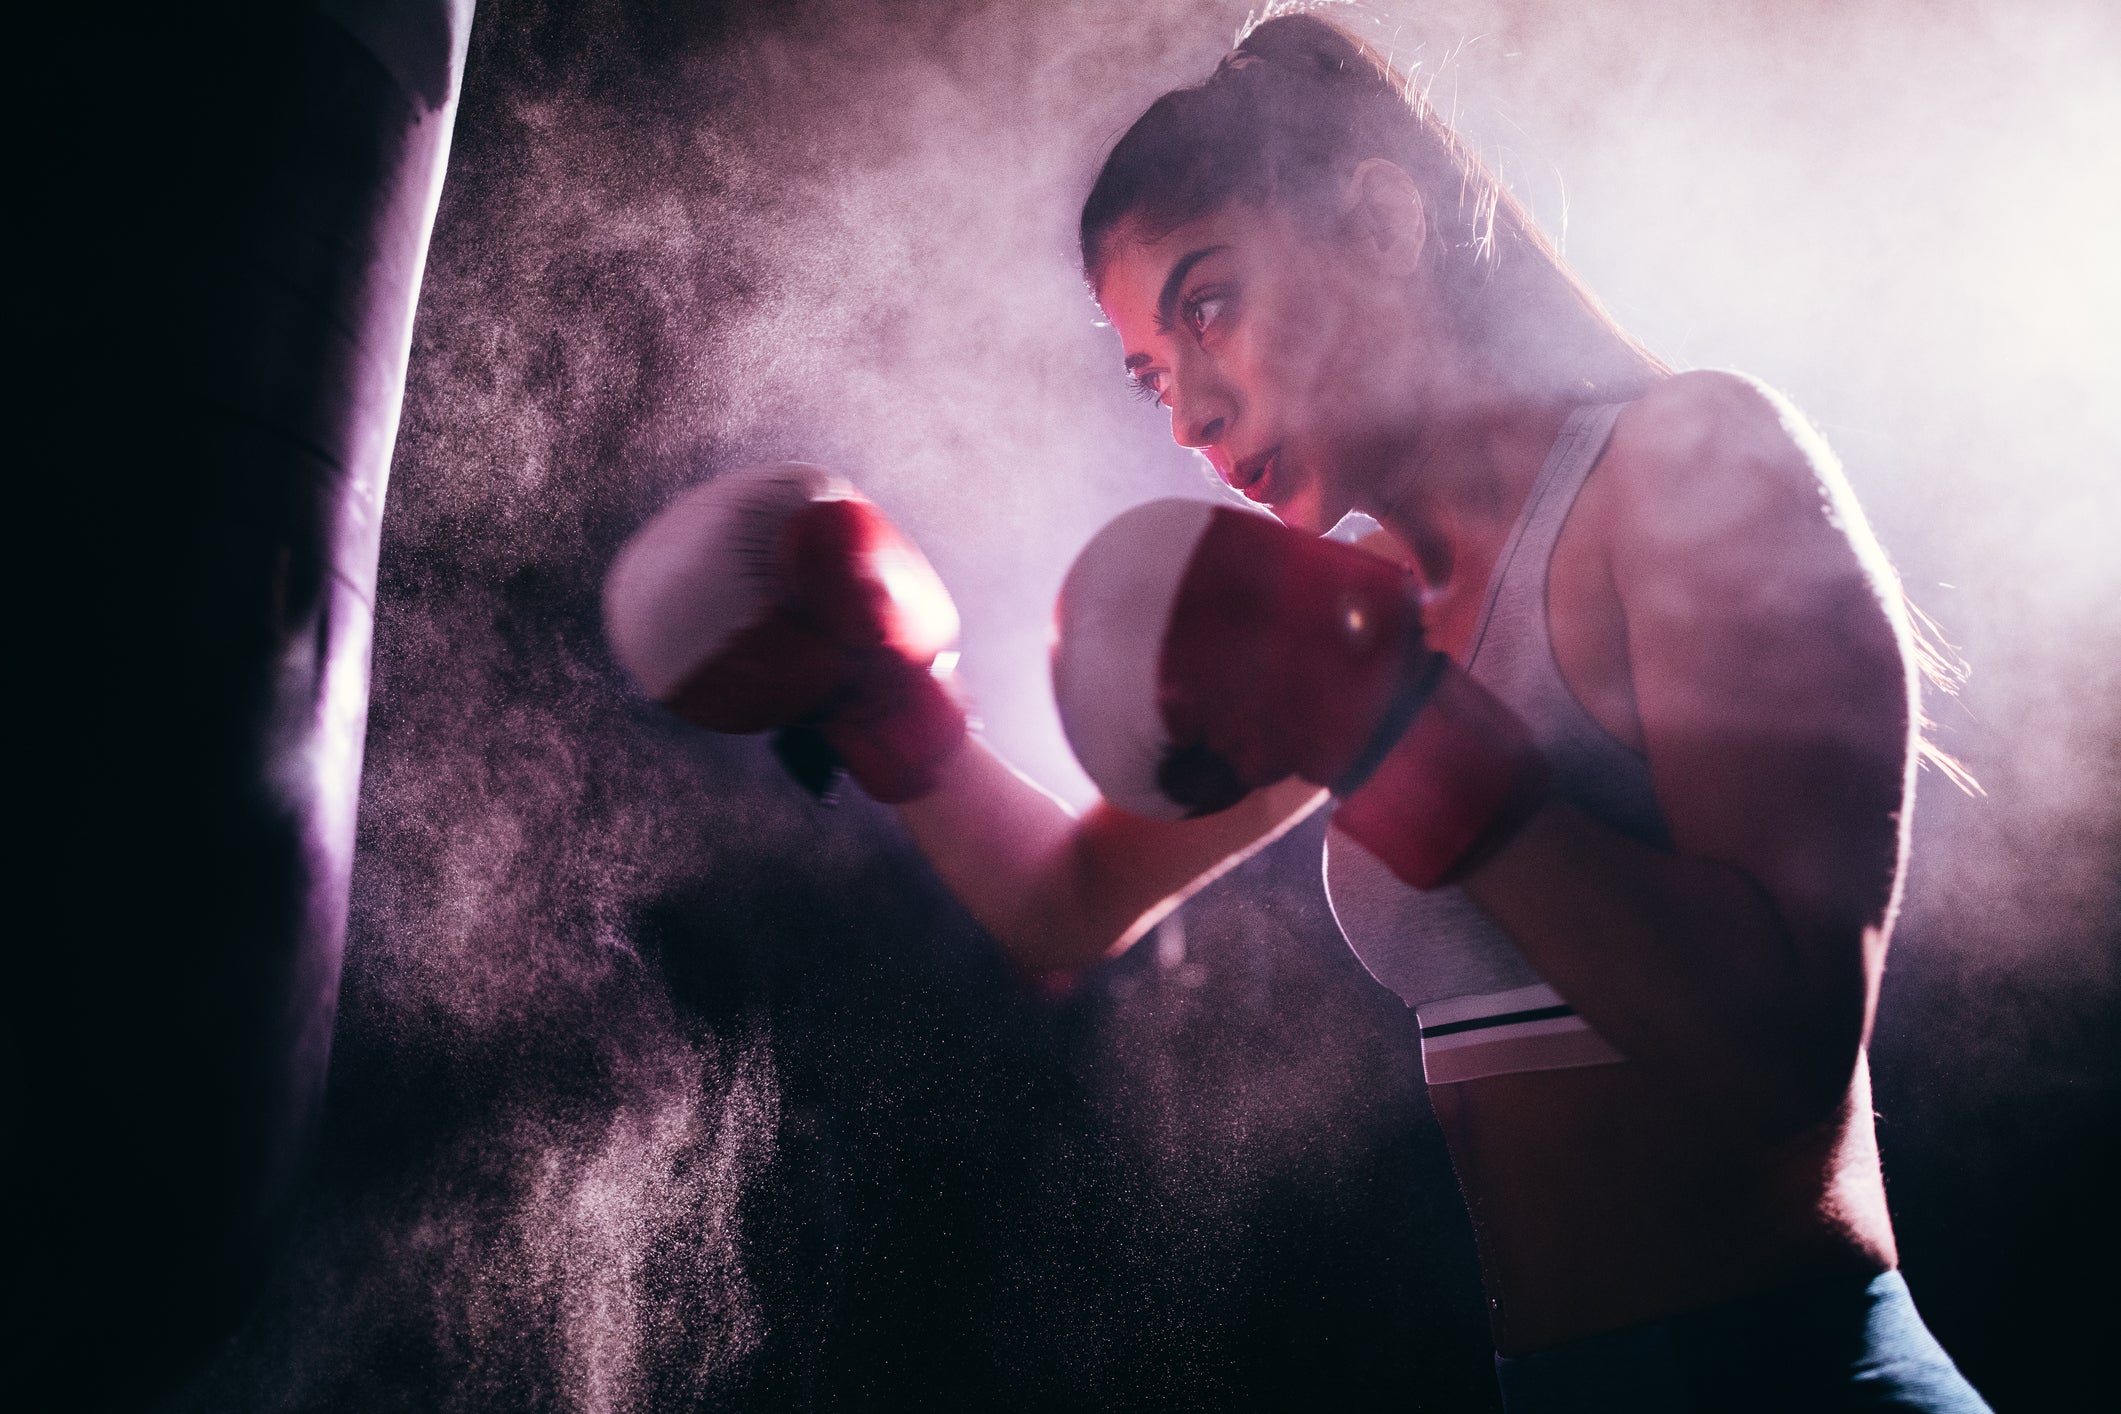 This Female Boxer Seeks to Knock Down the Industry's Gender Barriers